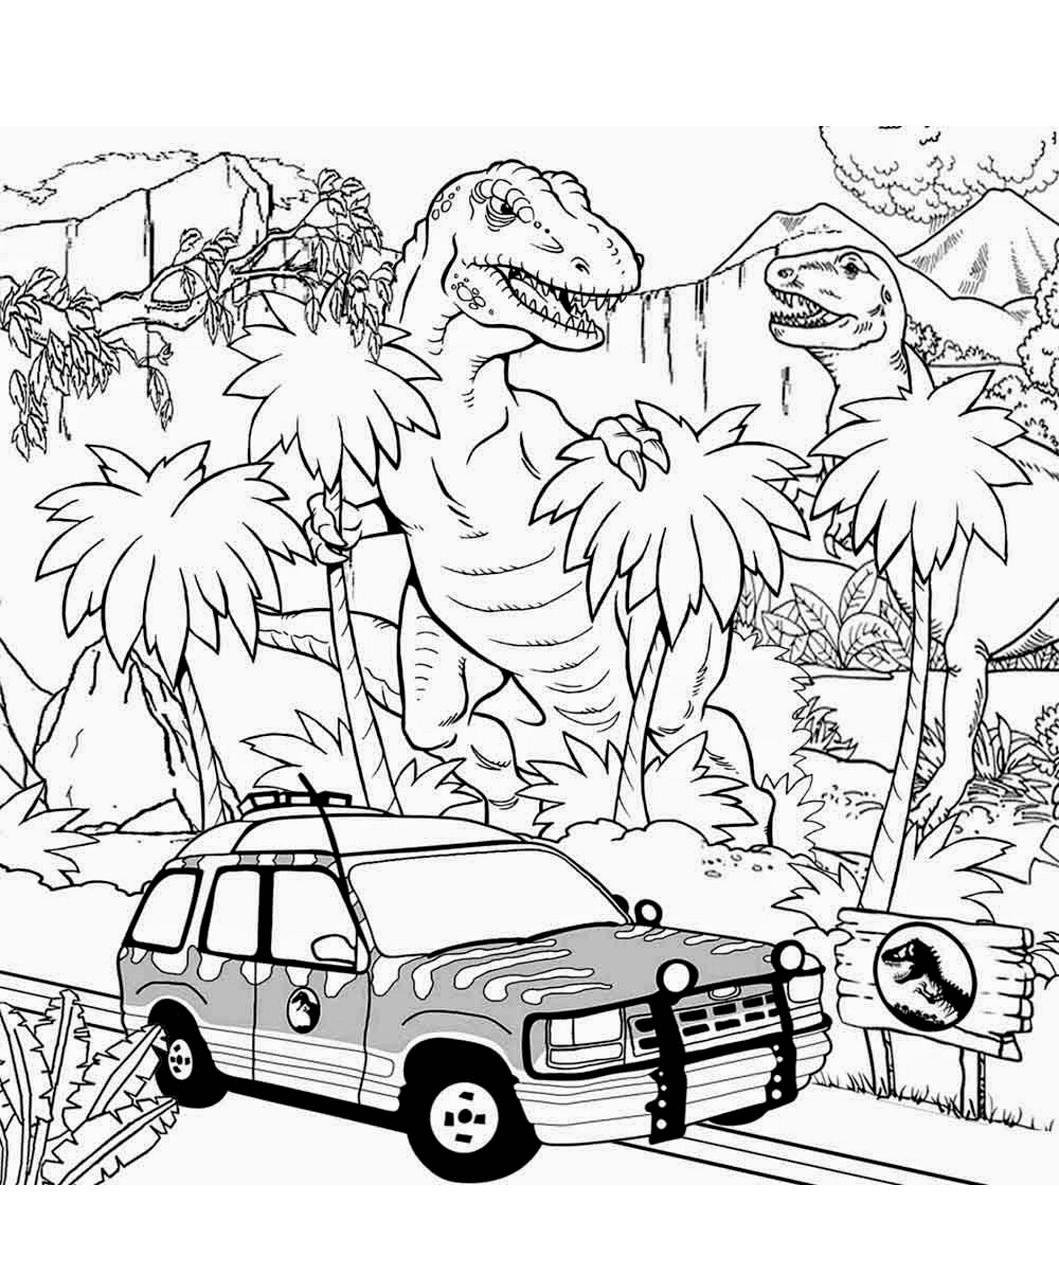 car in jurassic world coloring page free printable